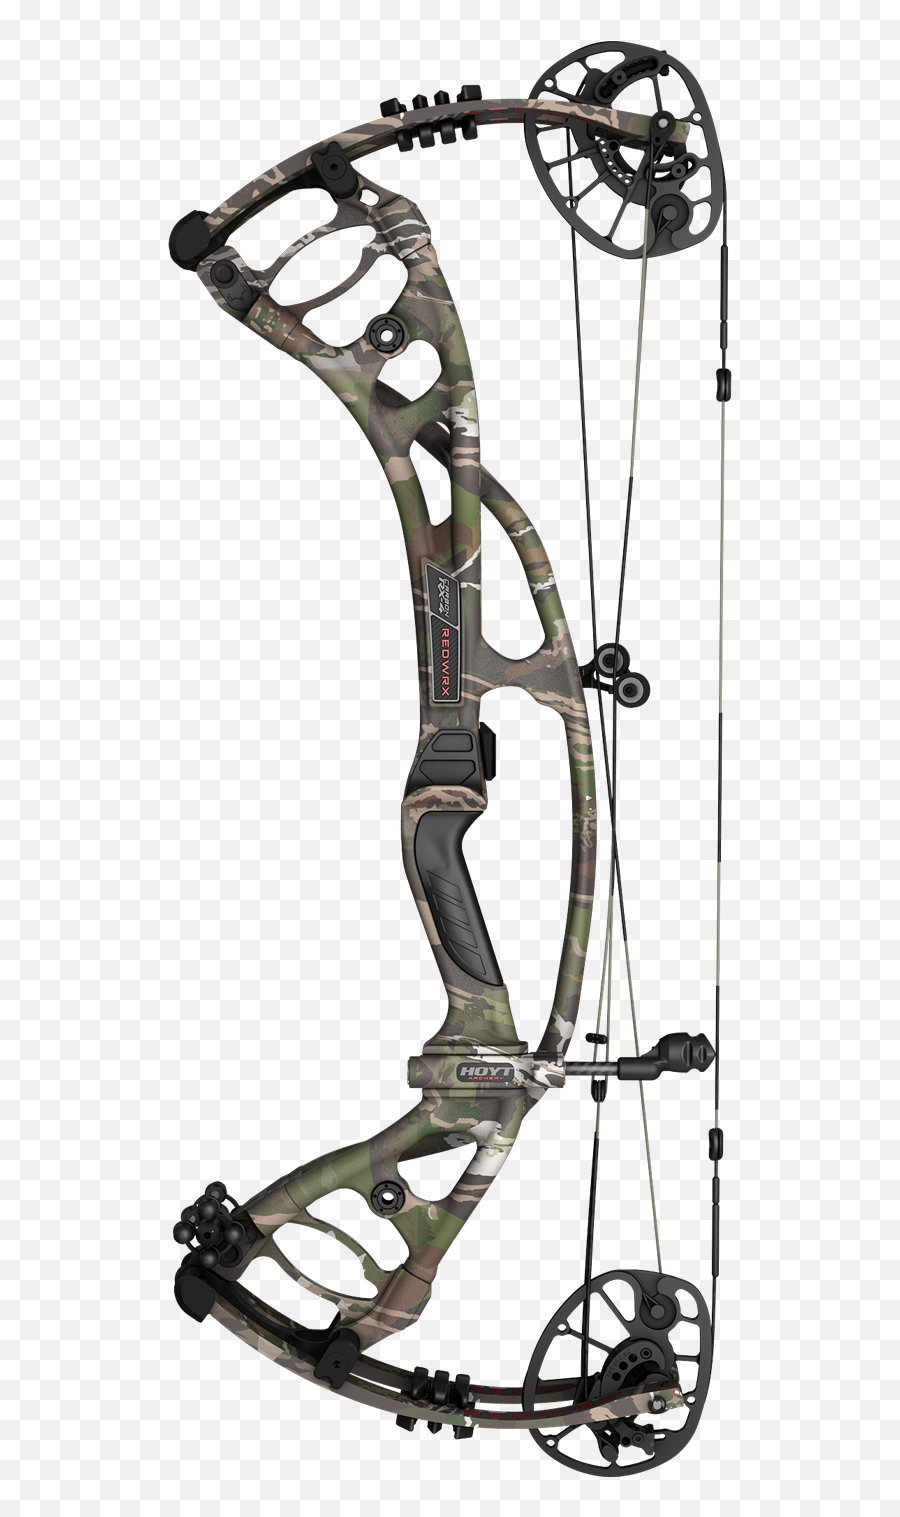 2020 Black Friday In - Hoyt Redwrx Carbon Rx 4 Png,Bowtech Carbon Icon Bow